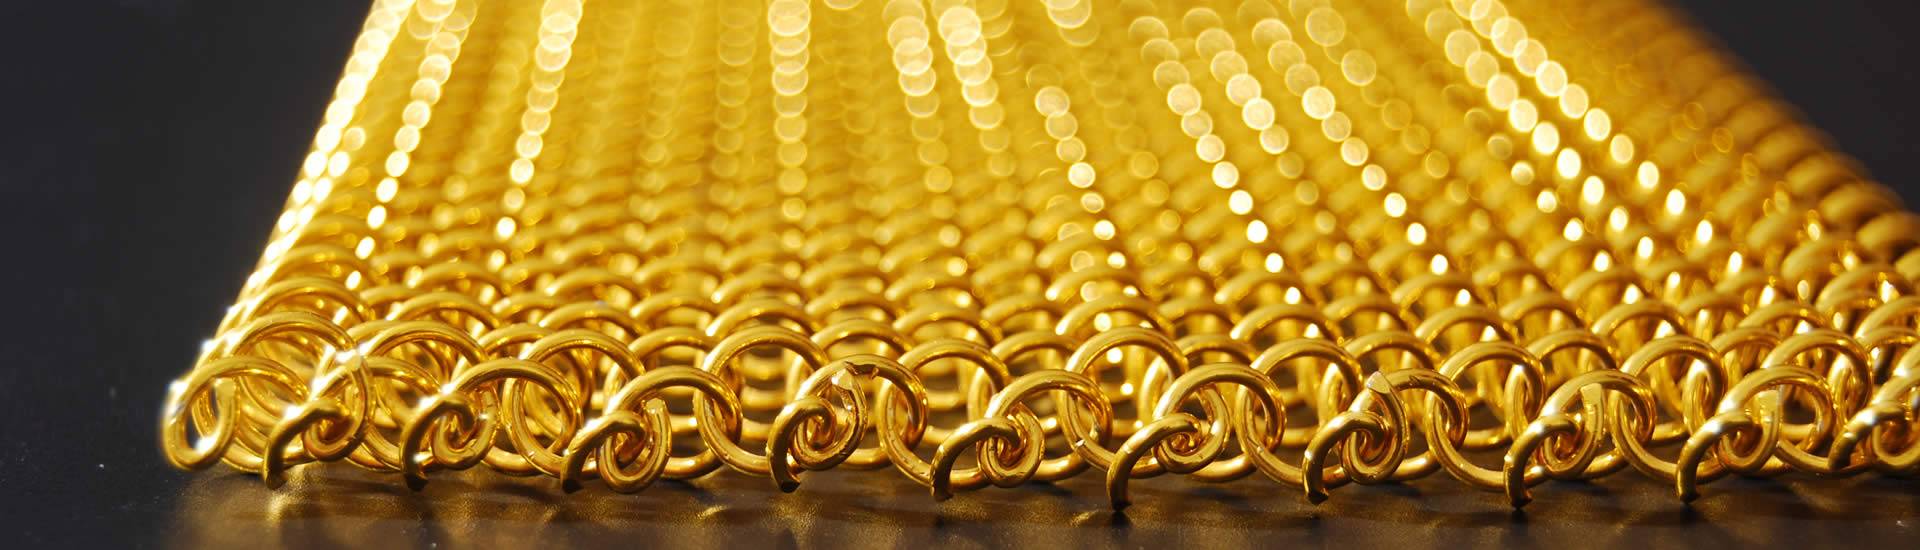 Details about edge of golden metal coil drapery.